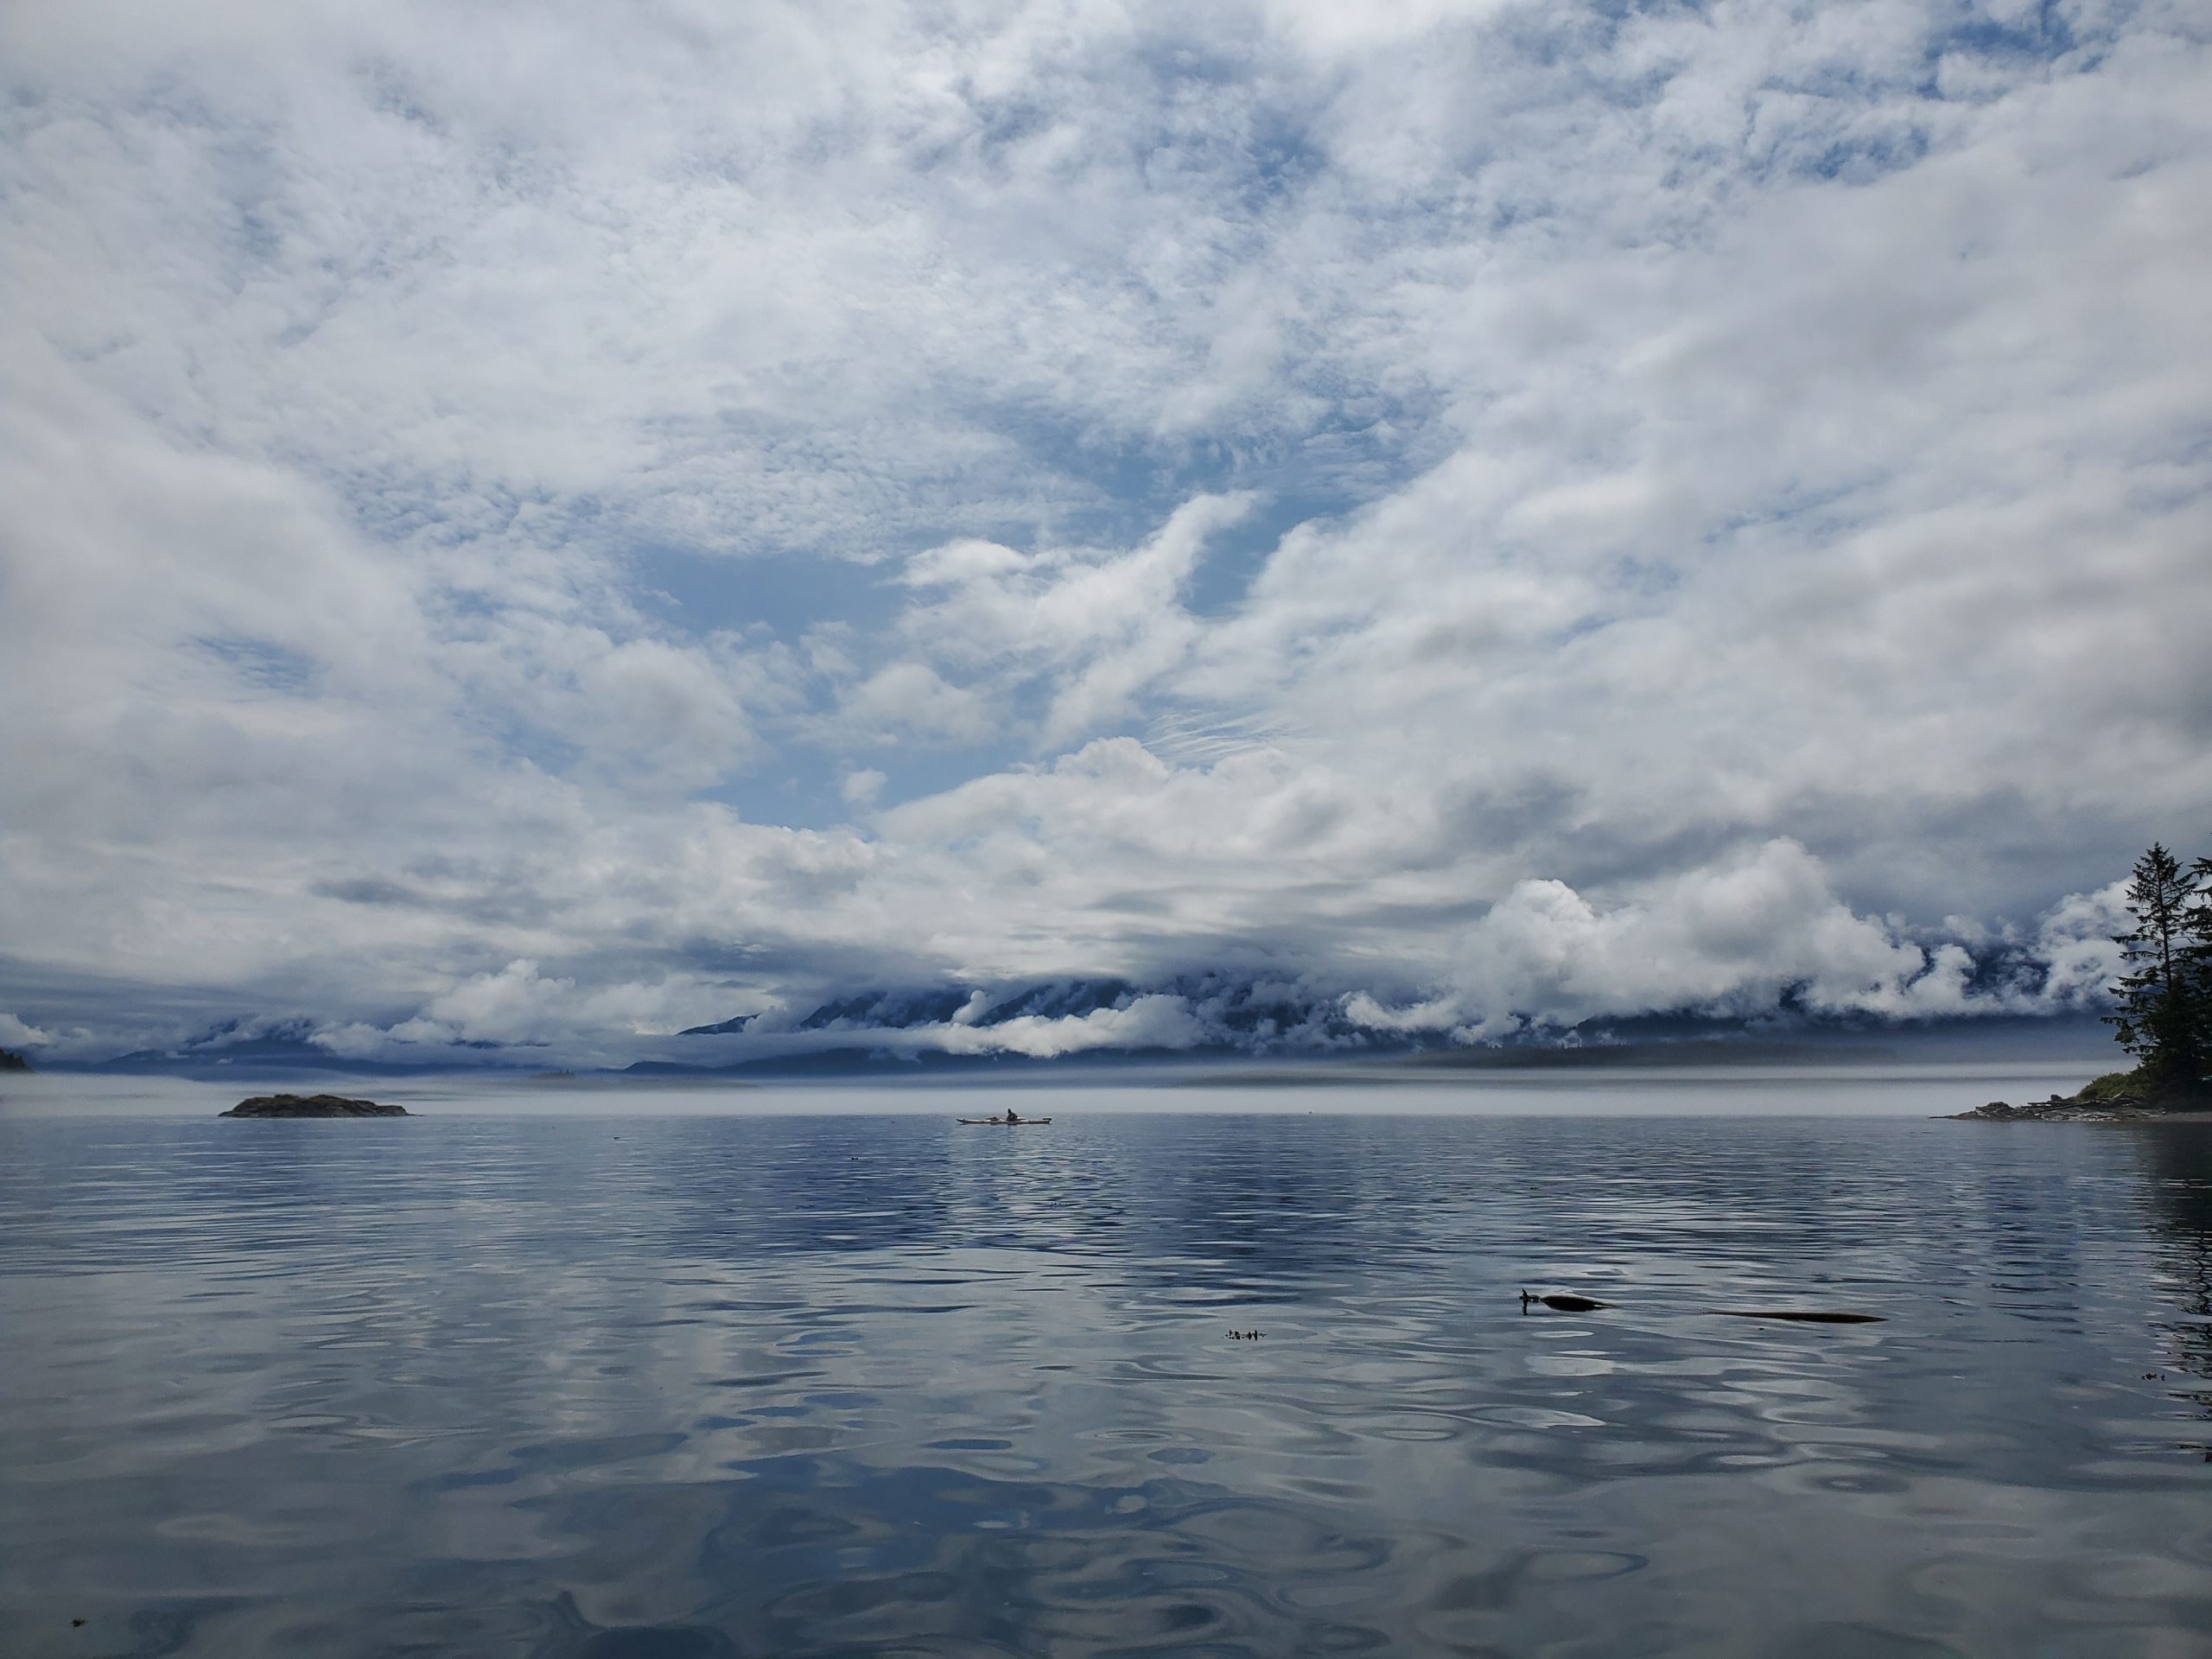 Johnstone Strait Expedition during Cloudy Weather